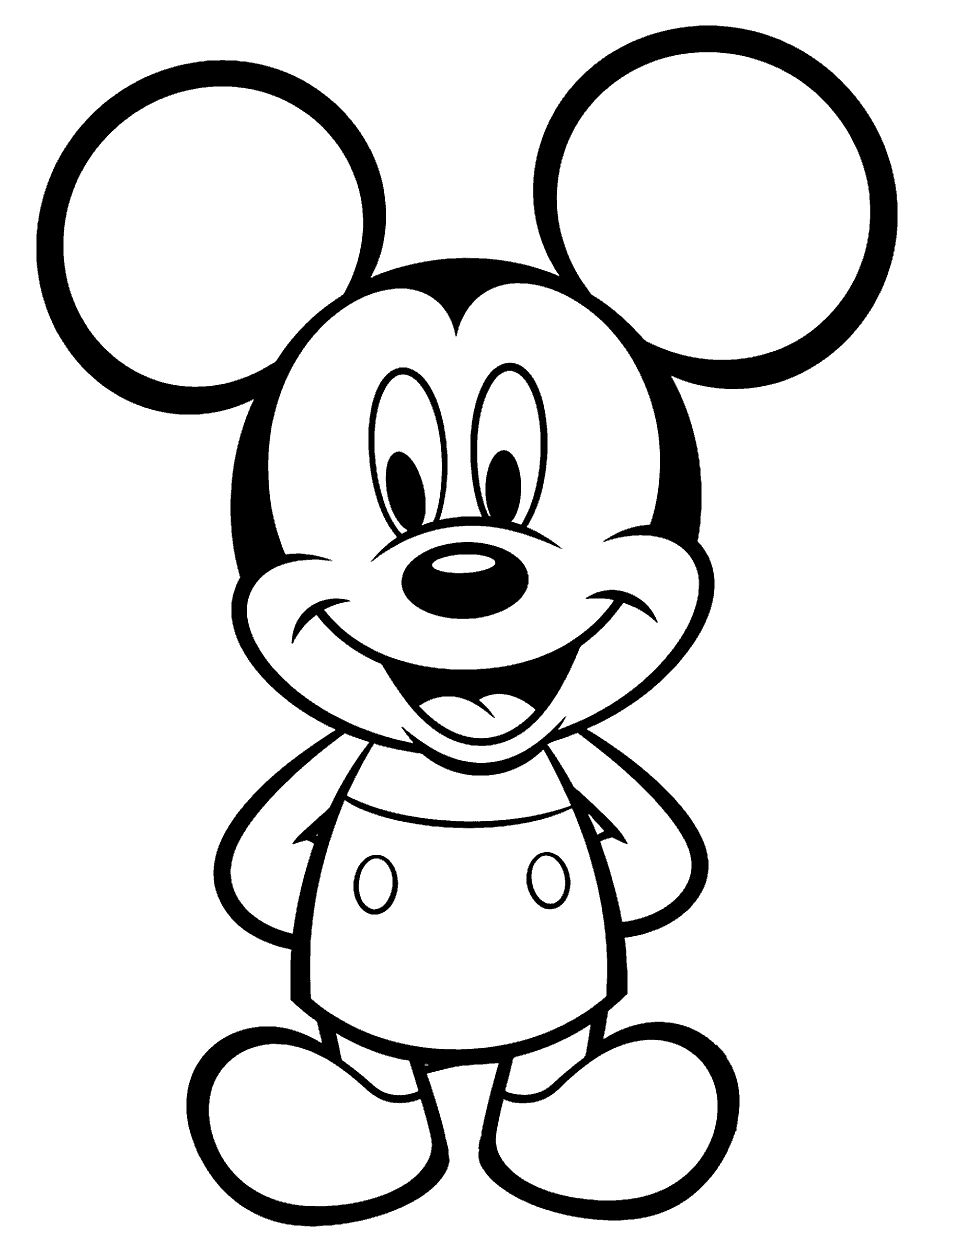 Mickey Mouse Coloring Page - An easy-to-color Mickey Mouse Design standing alone smiling.